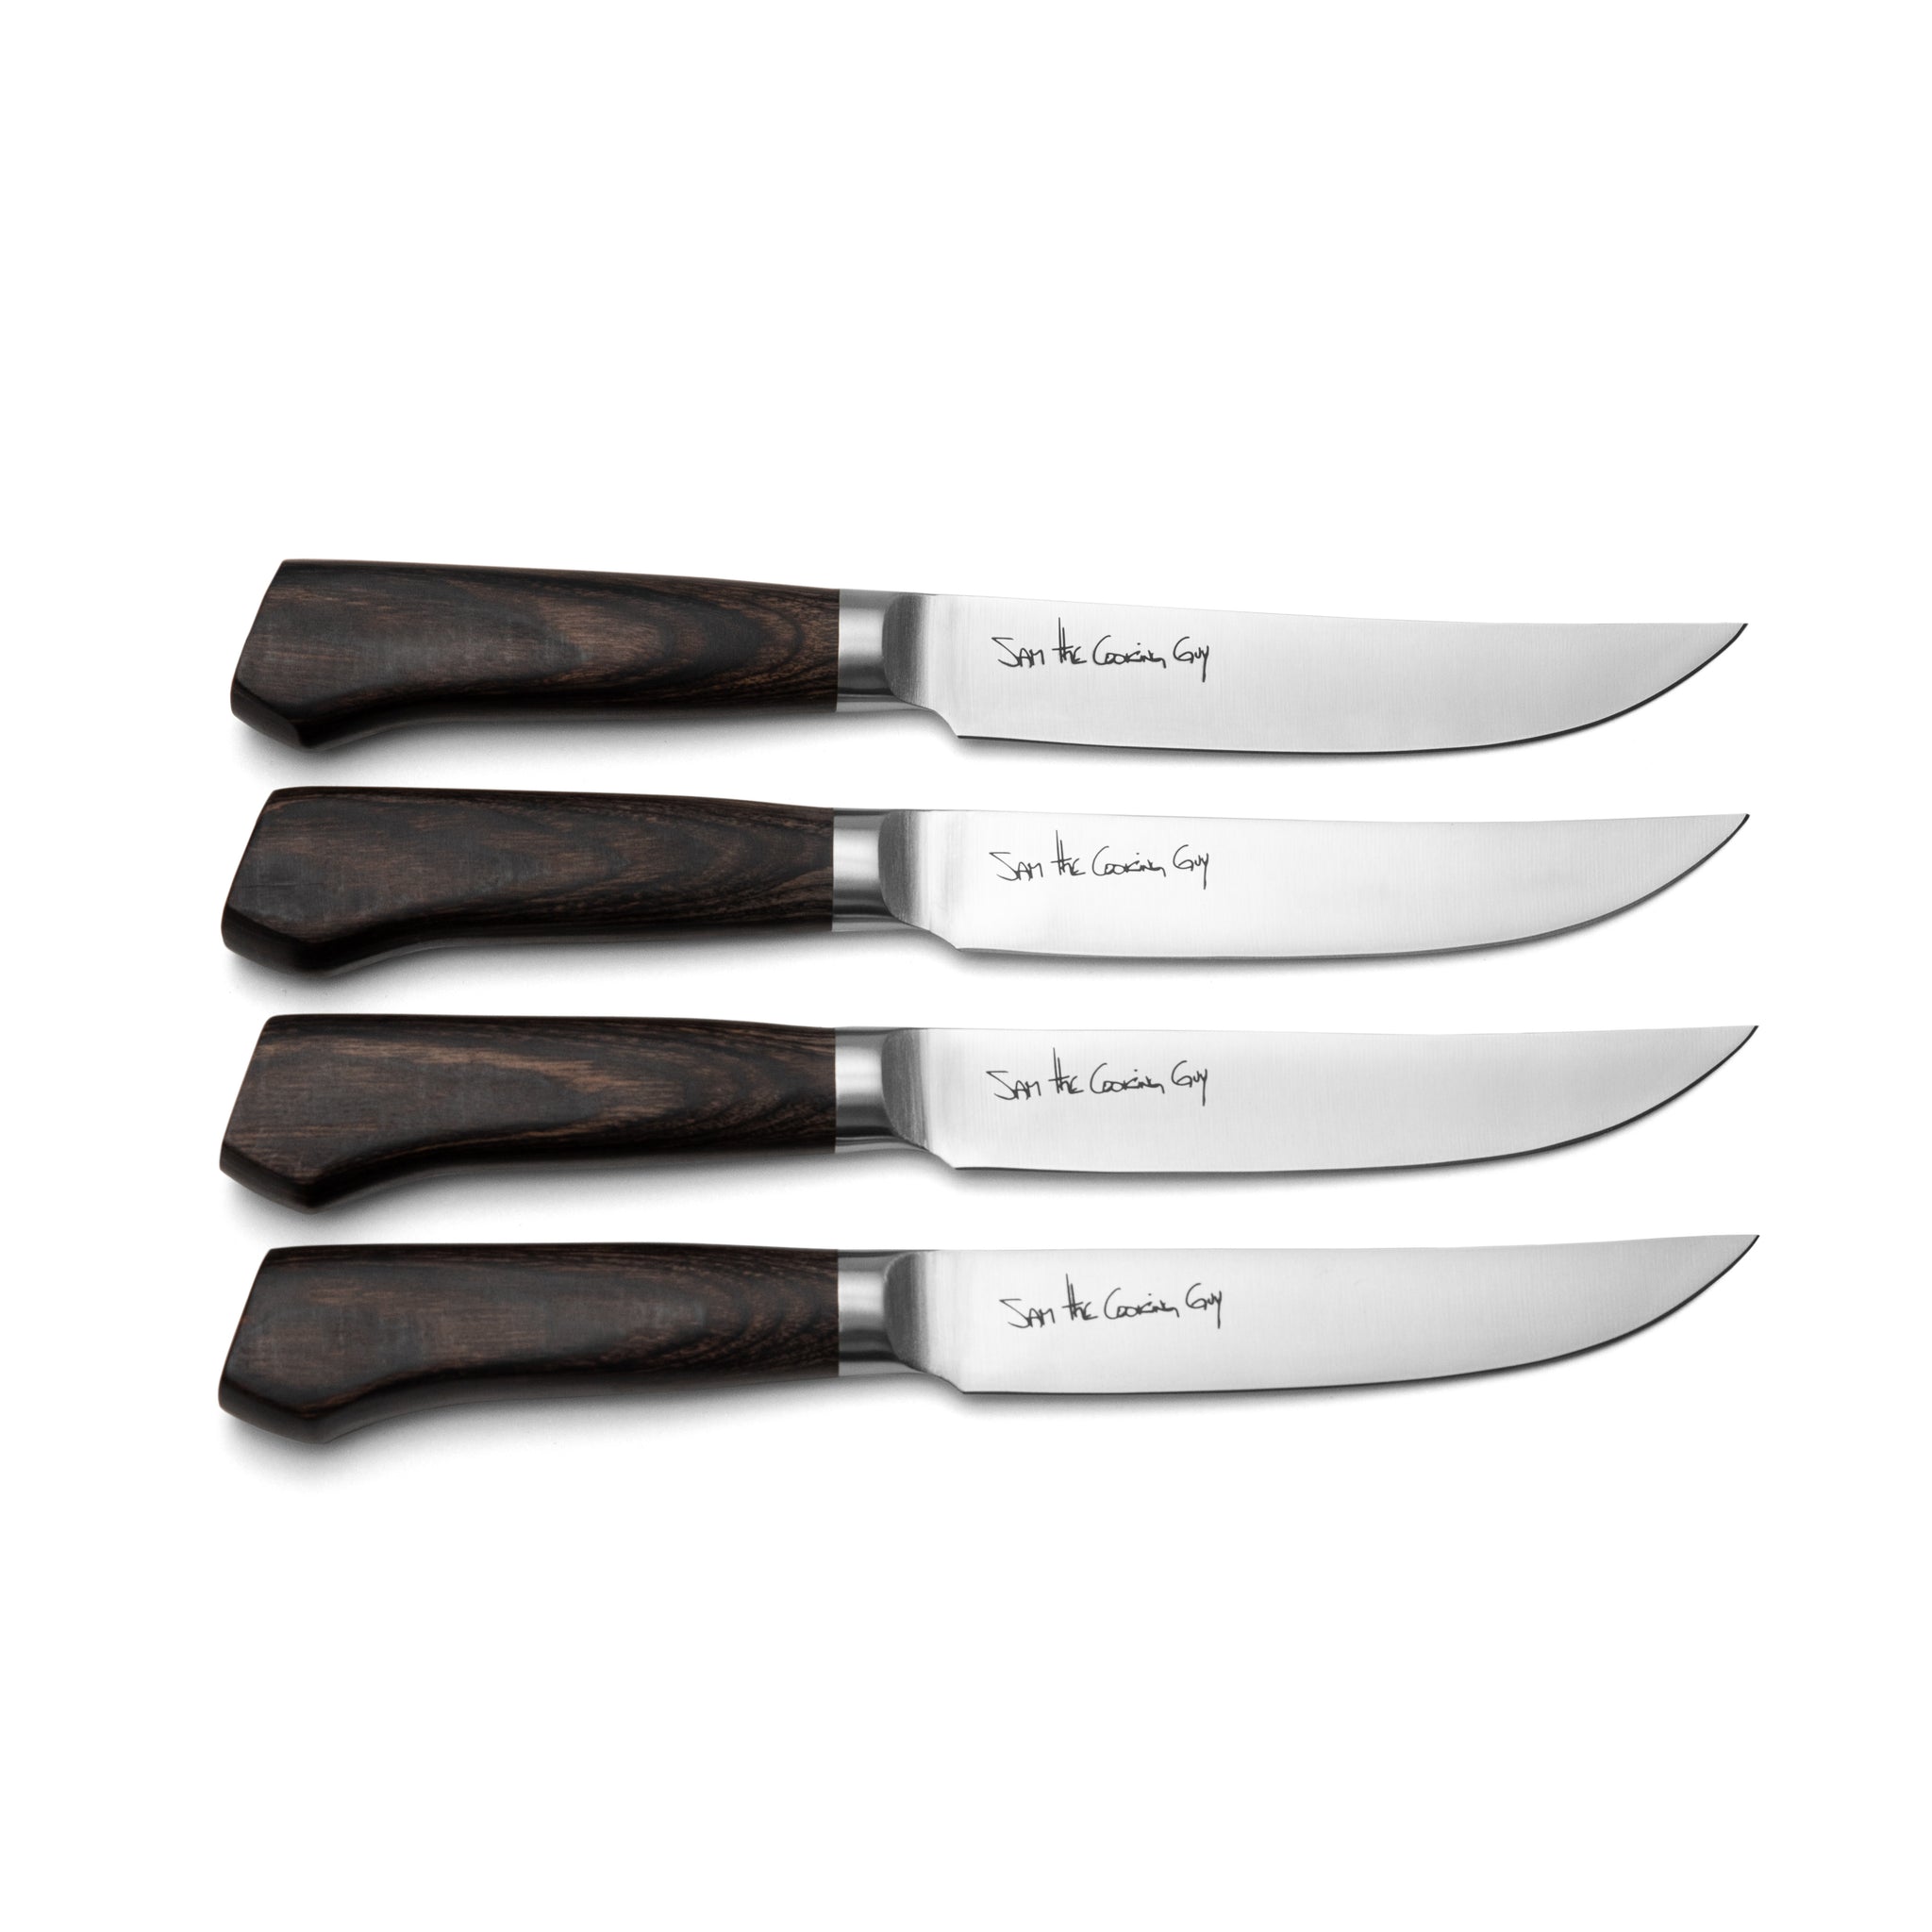 Buy 19 pc set- 12 pc set plus steak knives, order today and get a free –  Bavarian Knife Works